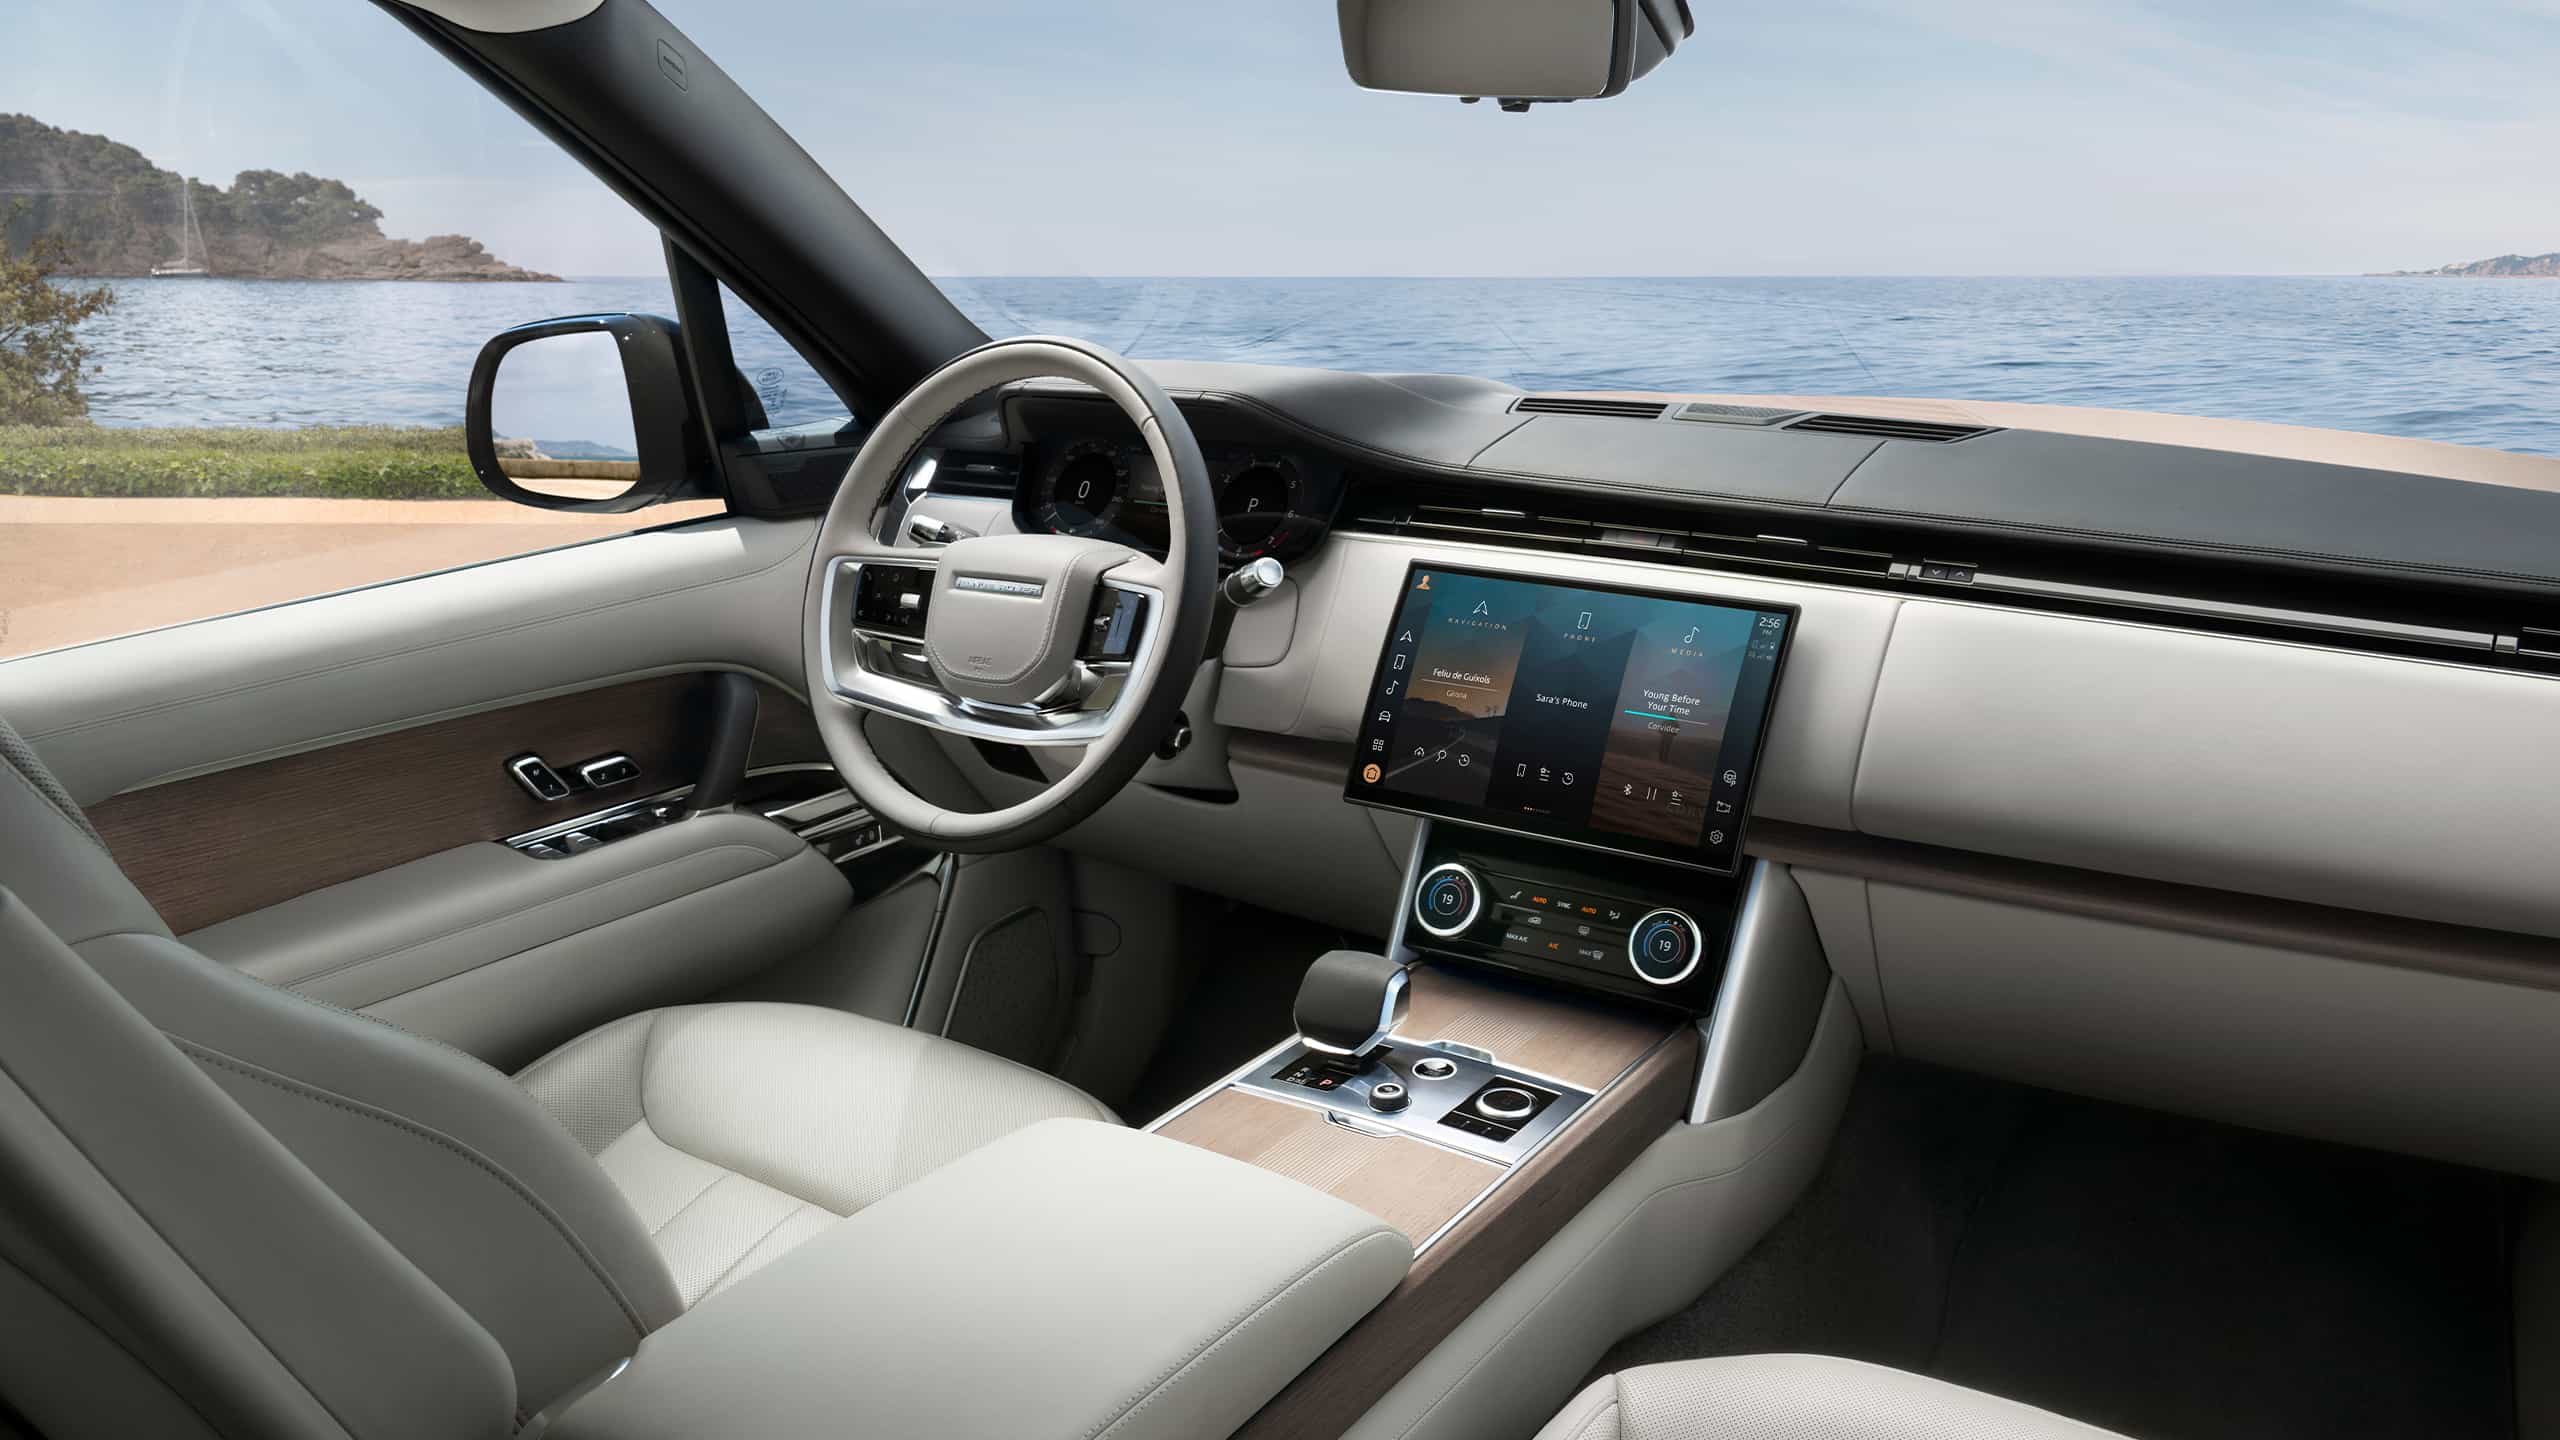 New Range Rover interior front view